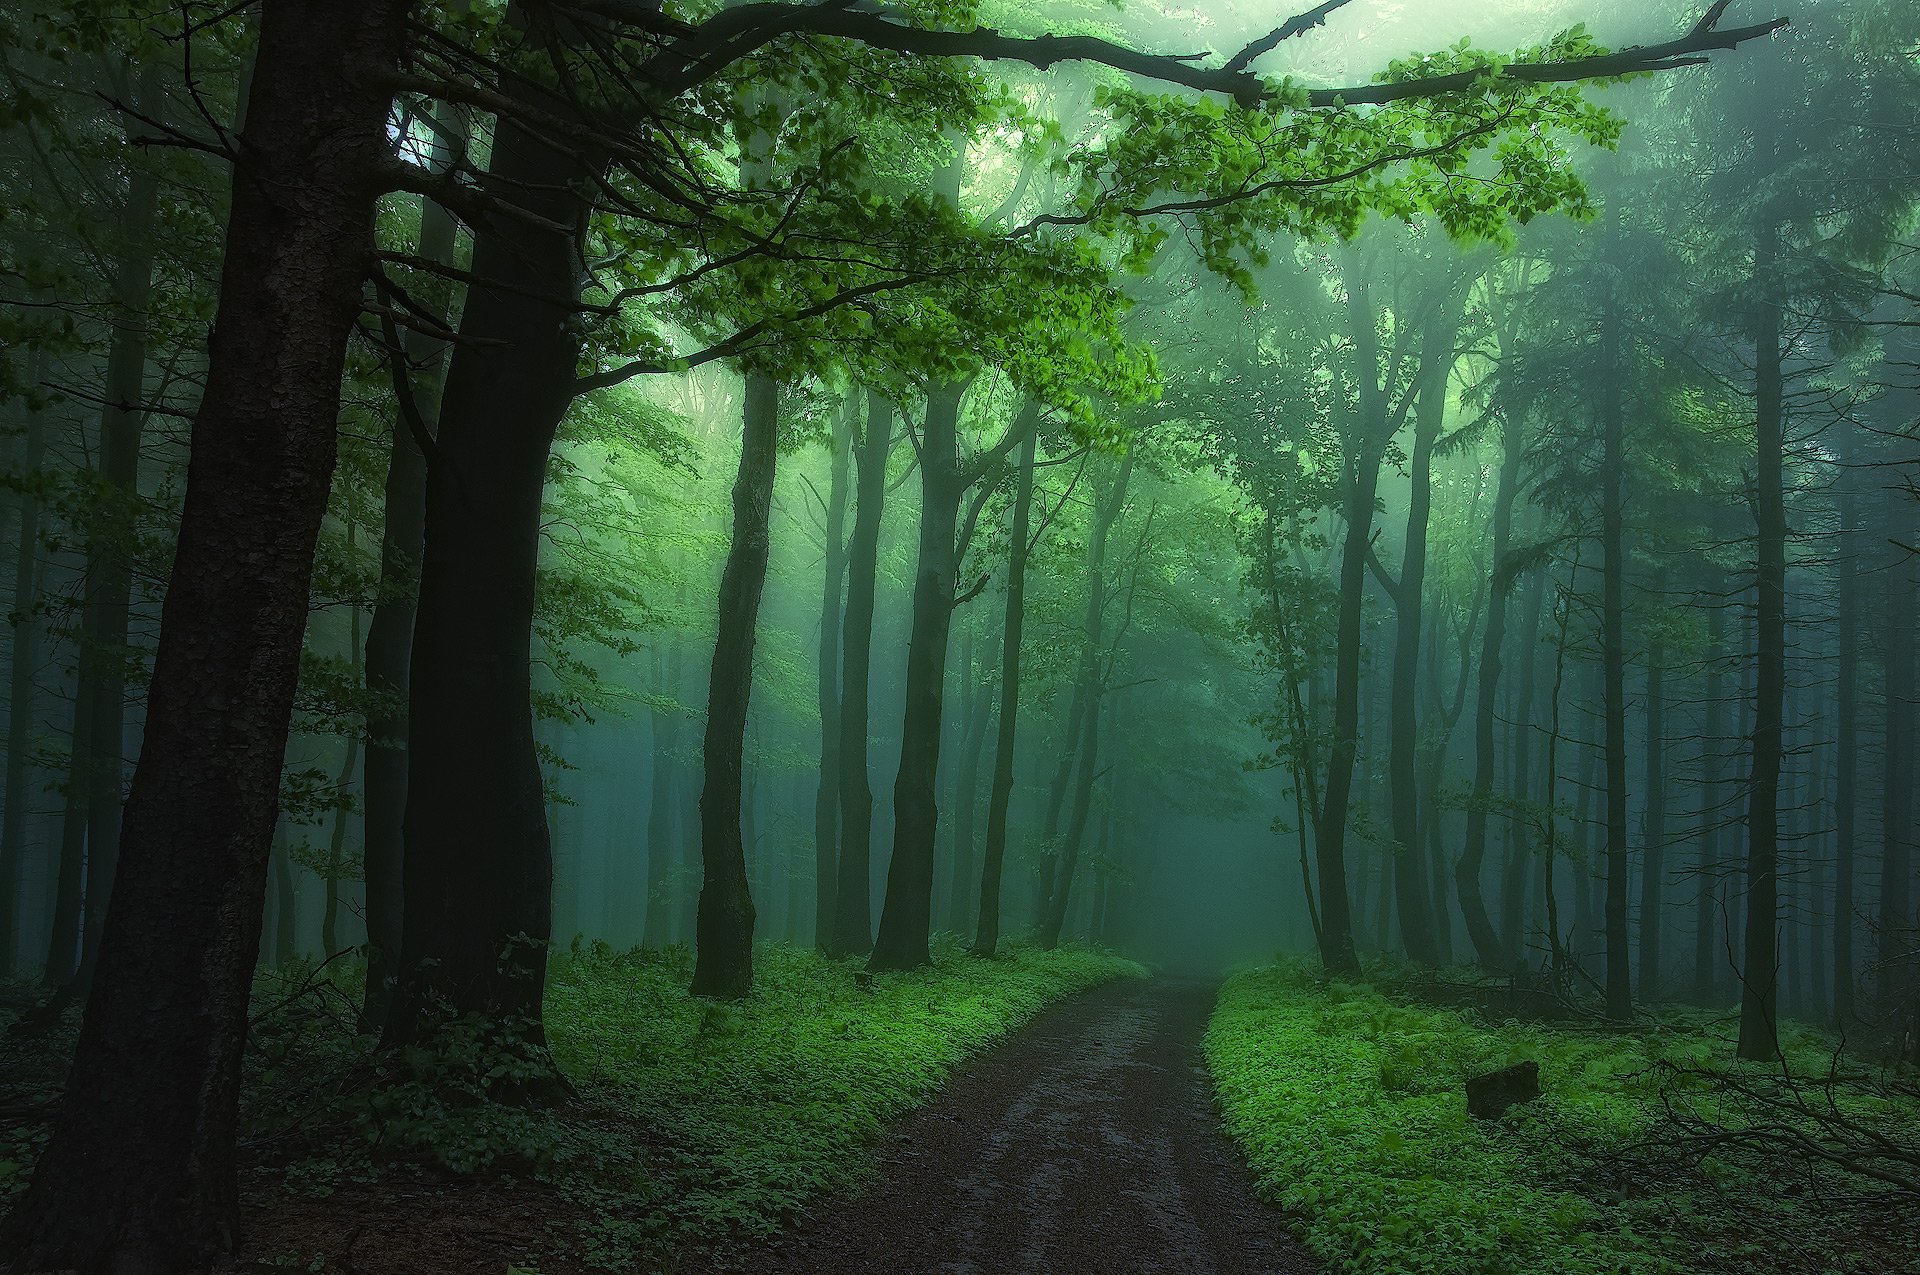 A misty forest path surrounded by lush green trees, creating a serene and mystical atmosphere. This high-definition desktop wallpaper captures the beauty of nature in a tranquil forest setting.